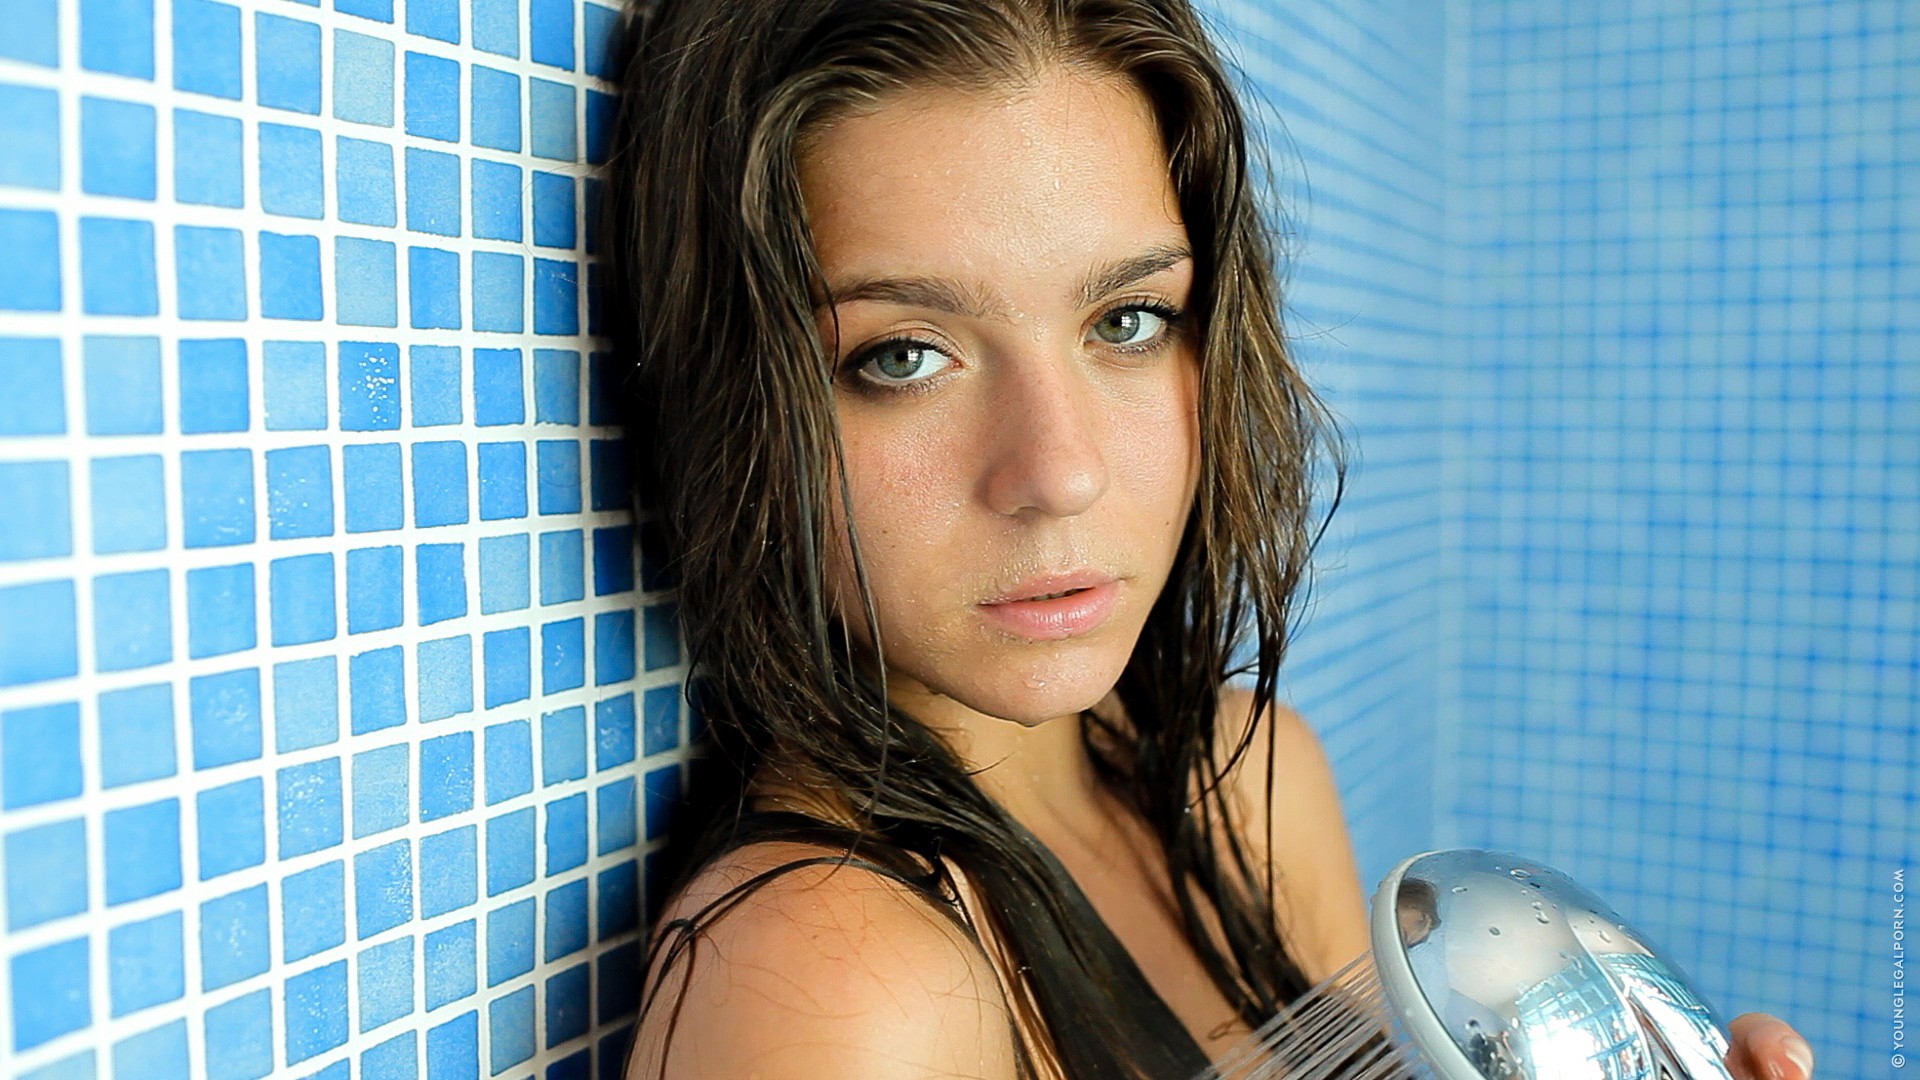 Green Eyed Brunette Is In The Shower Wallpapers And Images Wallpapers